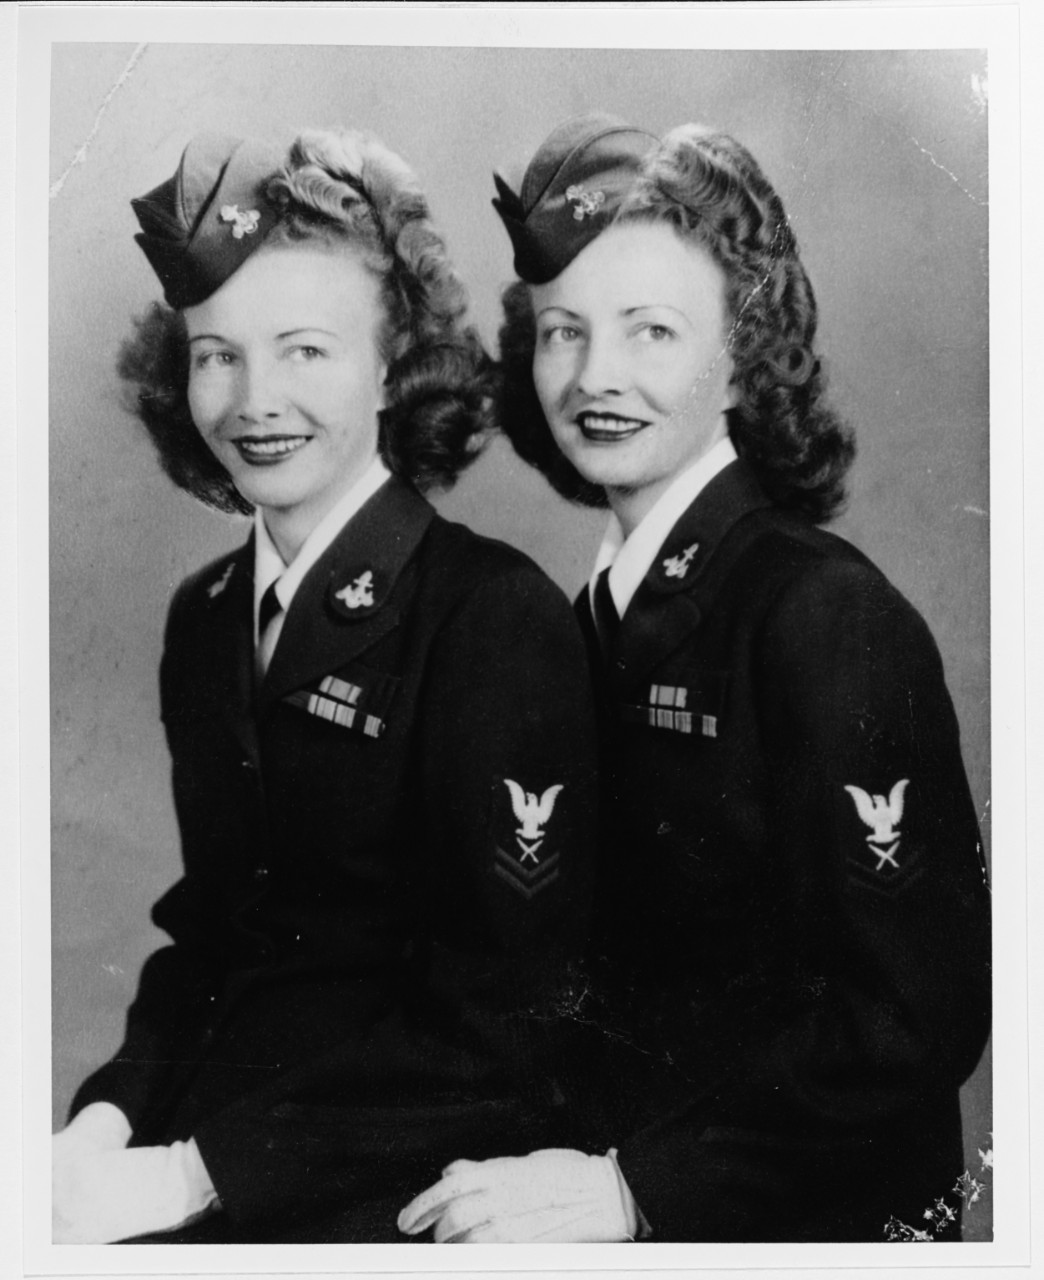 Photo #: NH 95015  Yeoman 2nd Class Isabelle Clemons (Wells) and her sister Yeoman 2nd Class Lorraine Clemons (Canter)